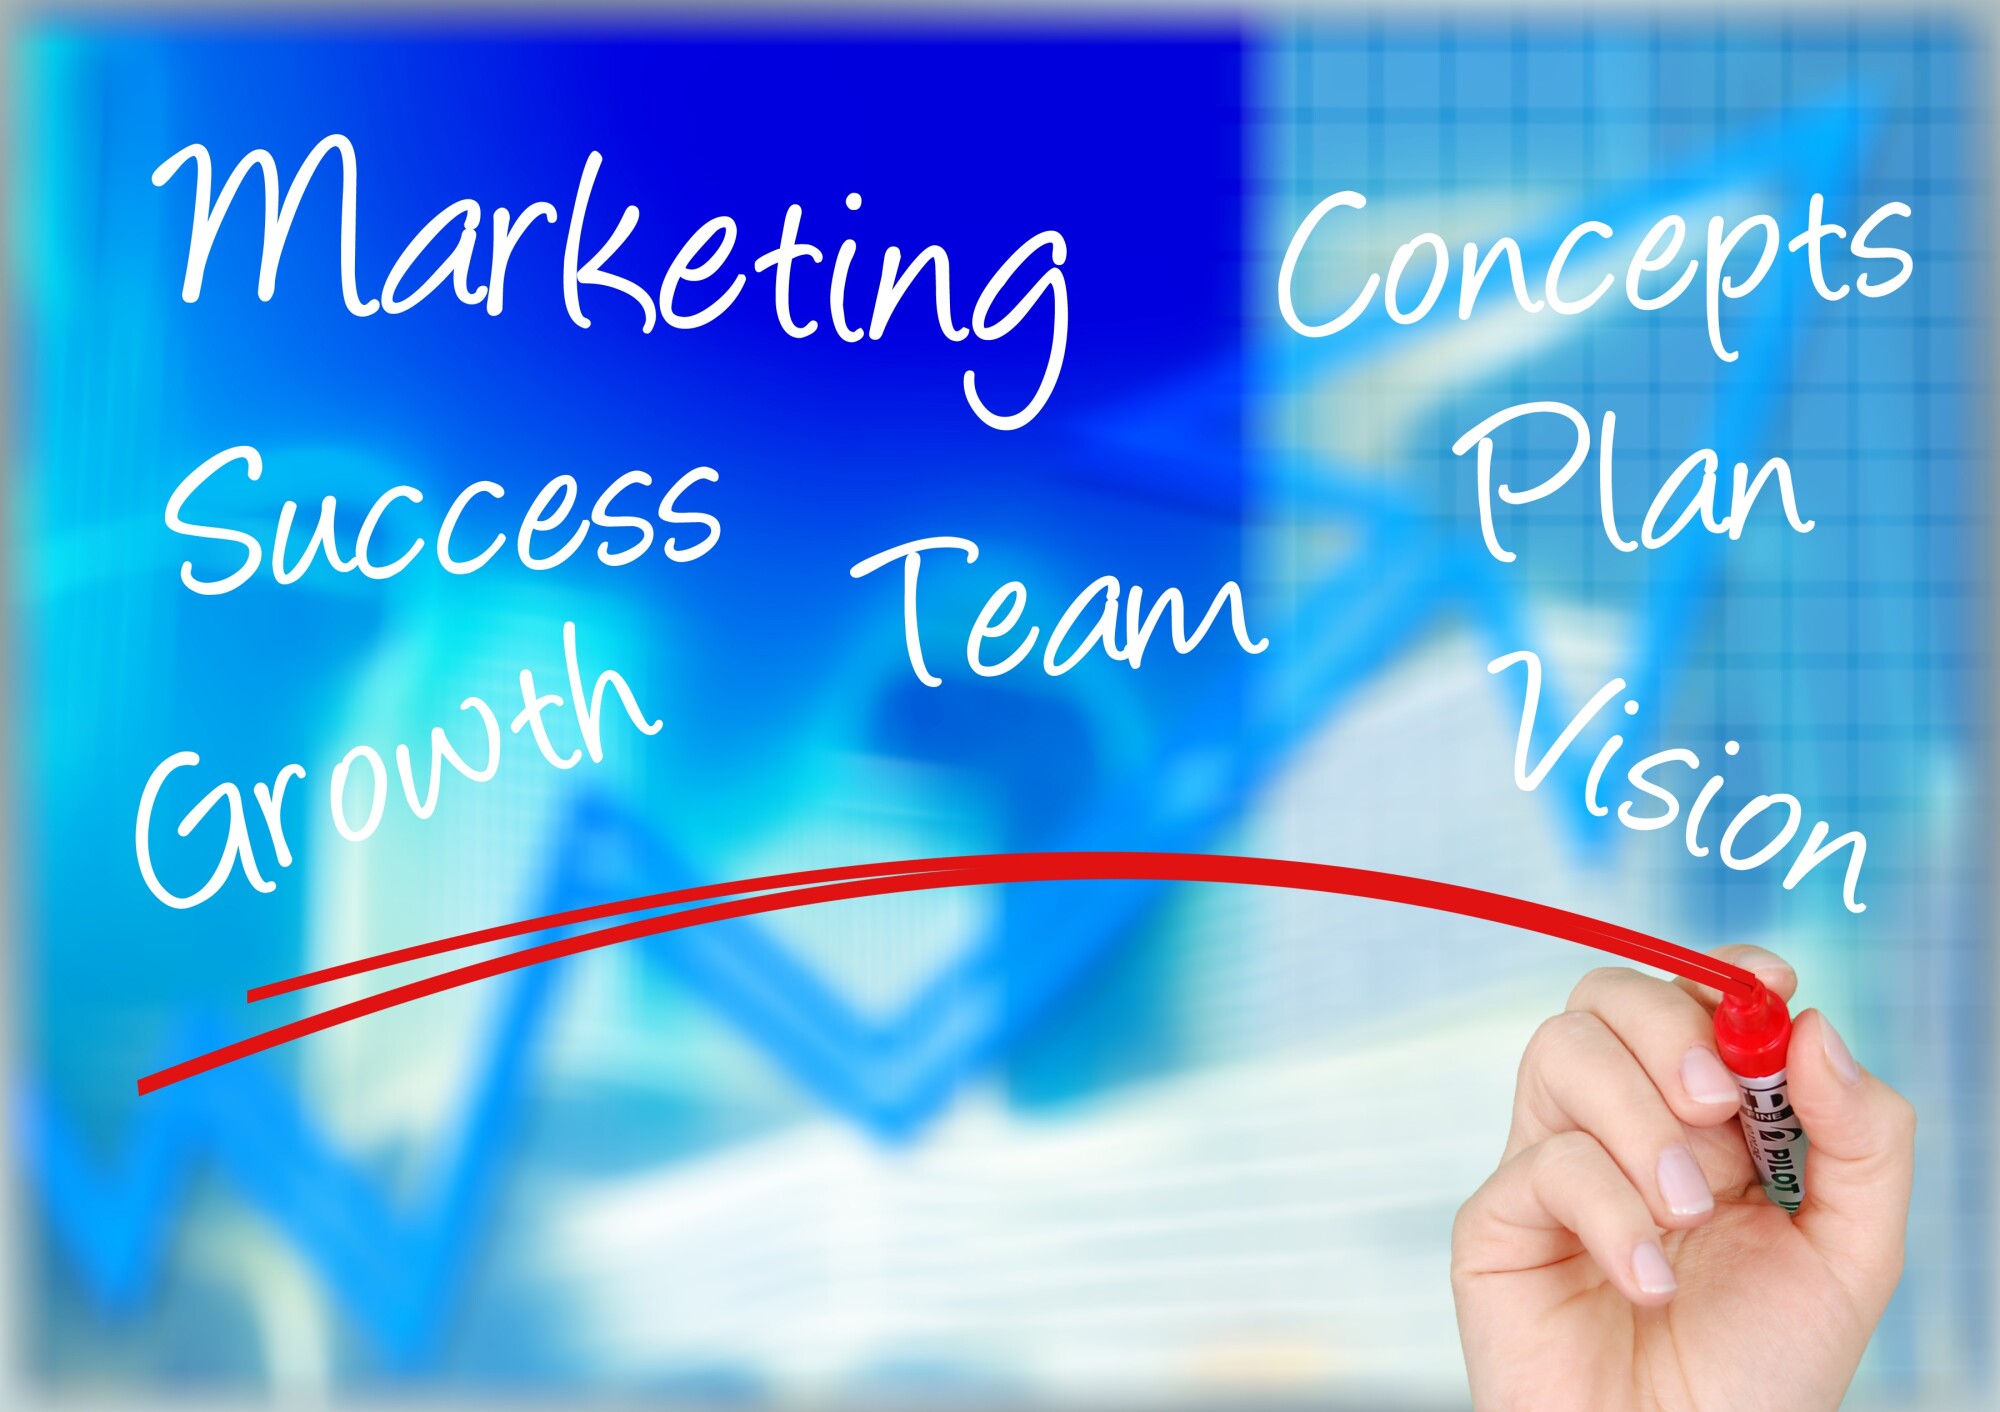 How Can You Create an Effective Real Estate Marketing Strategy?